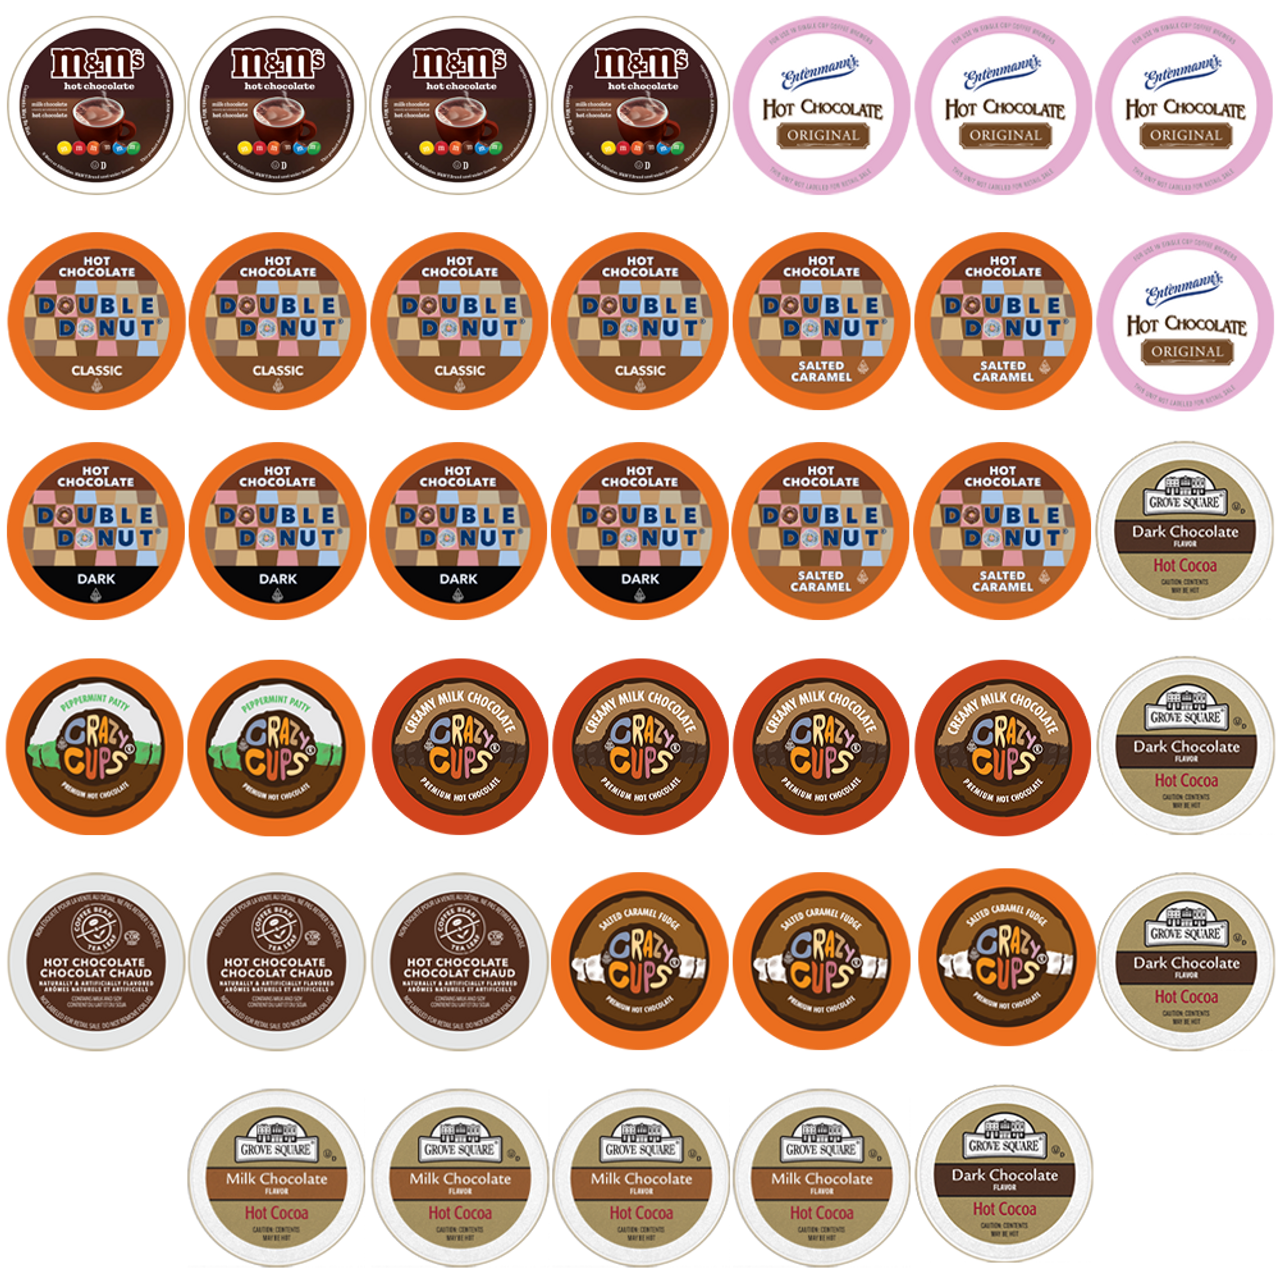 CHOCOLATE CUPS VARIETY PACK – EVOLVED CHOCOLATE